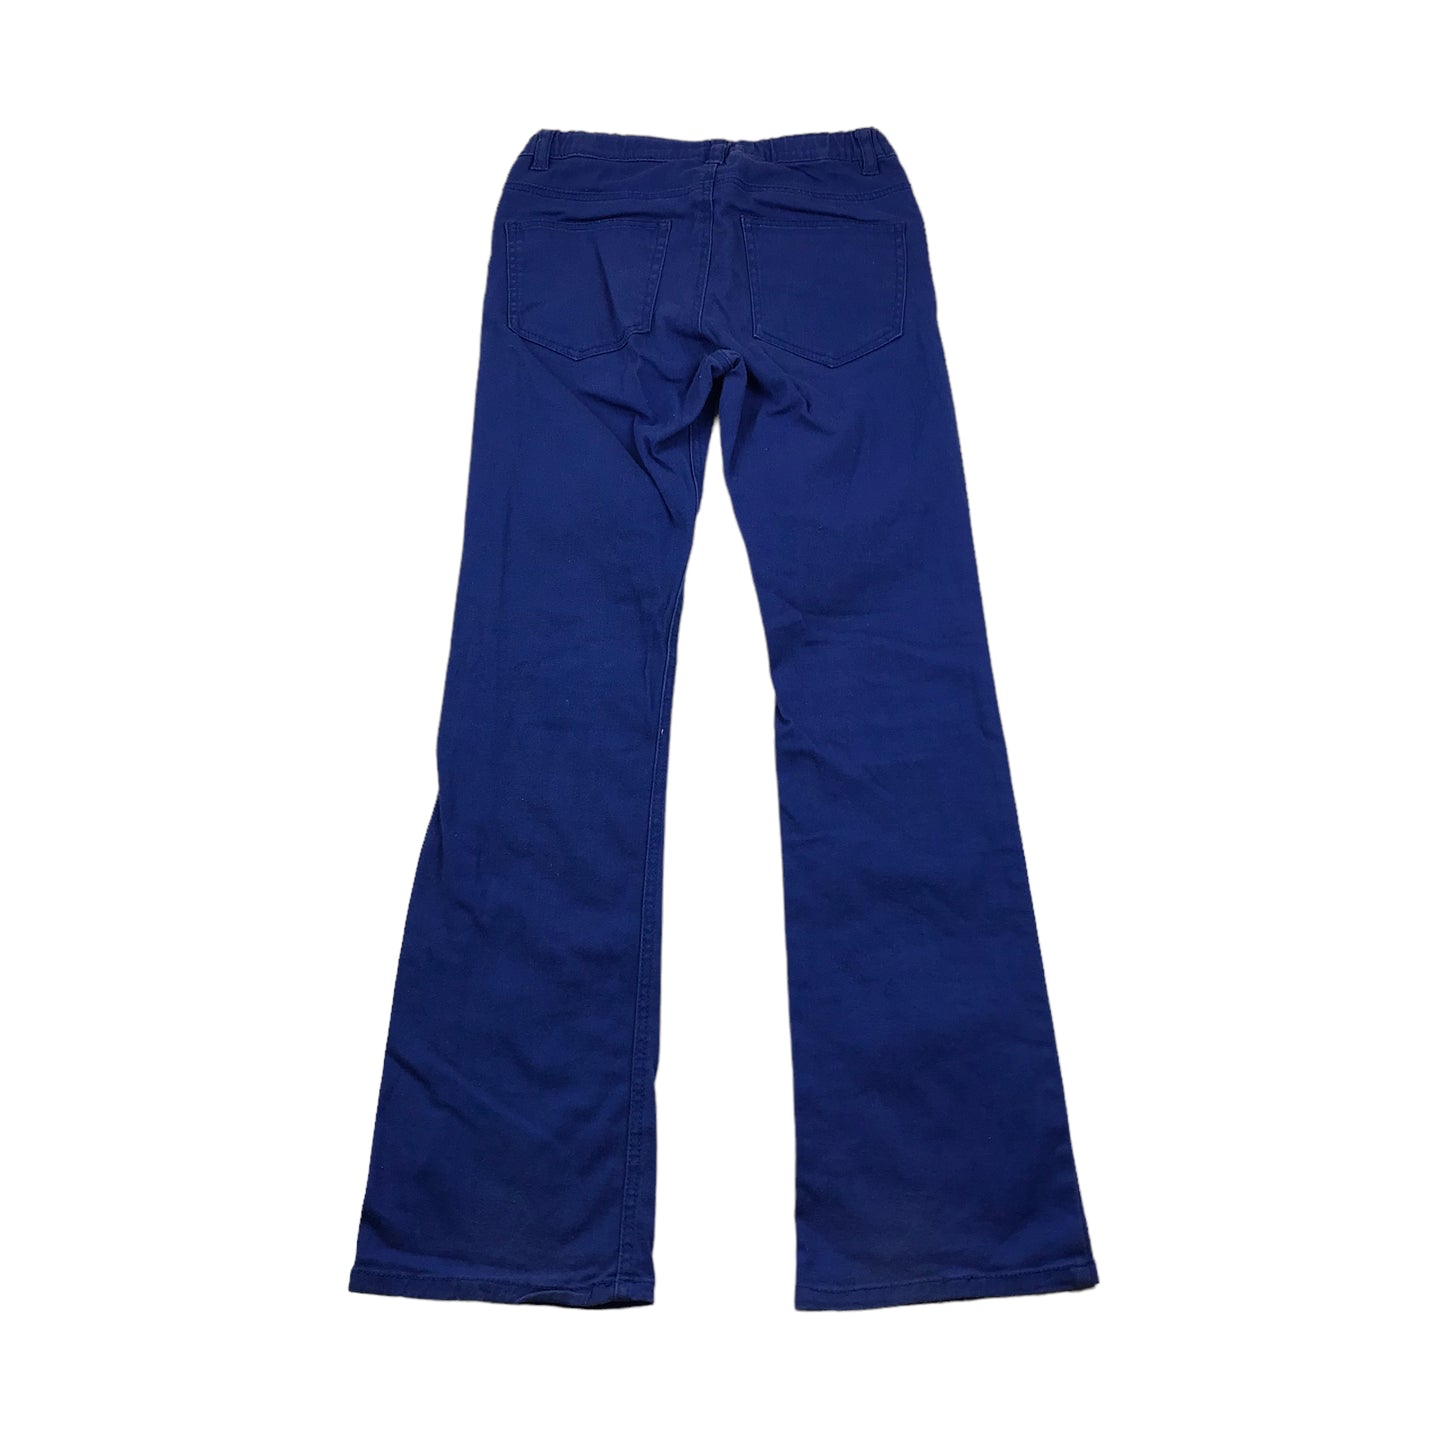 H&M Blue Floral Embroidery Denim-Style Trousers Age 9